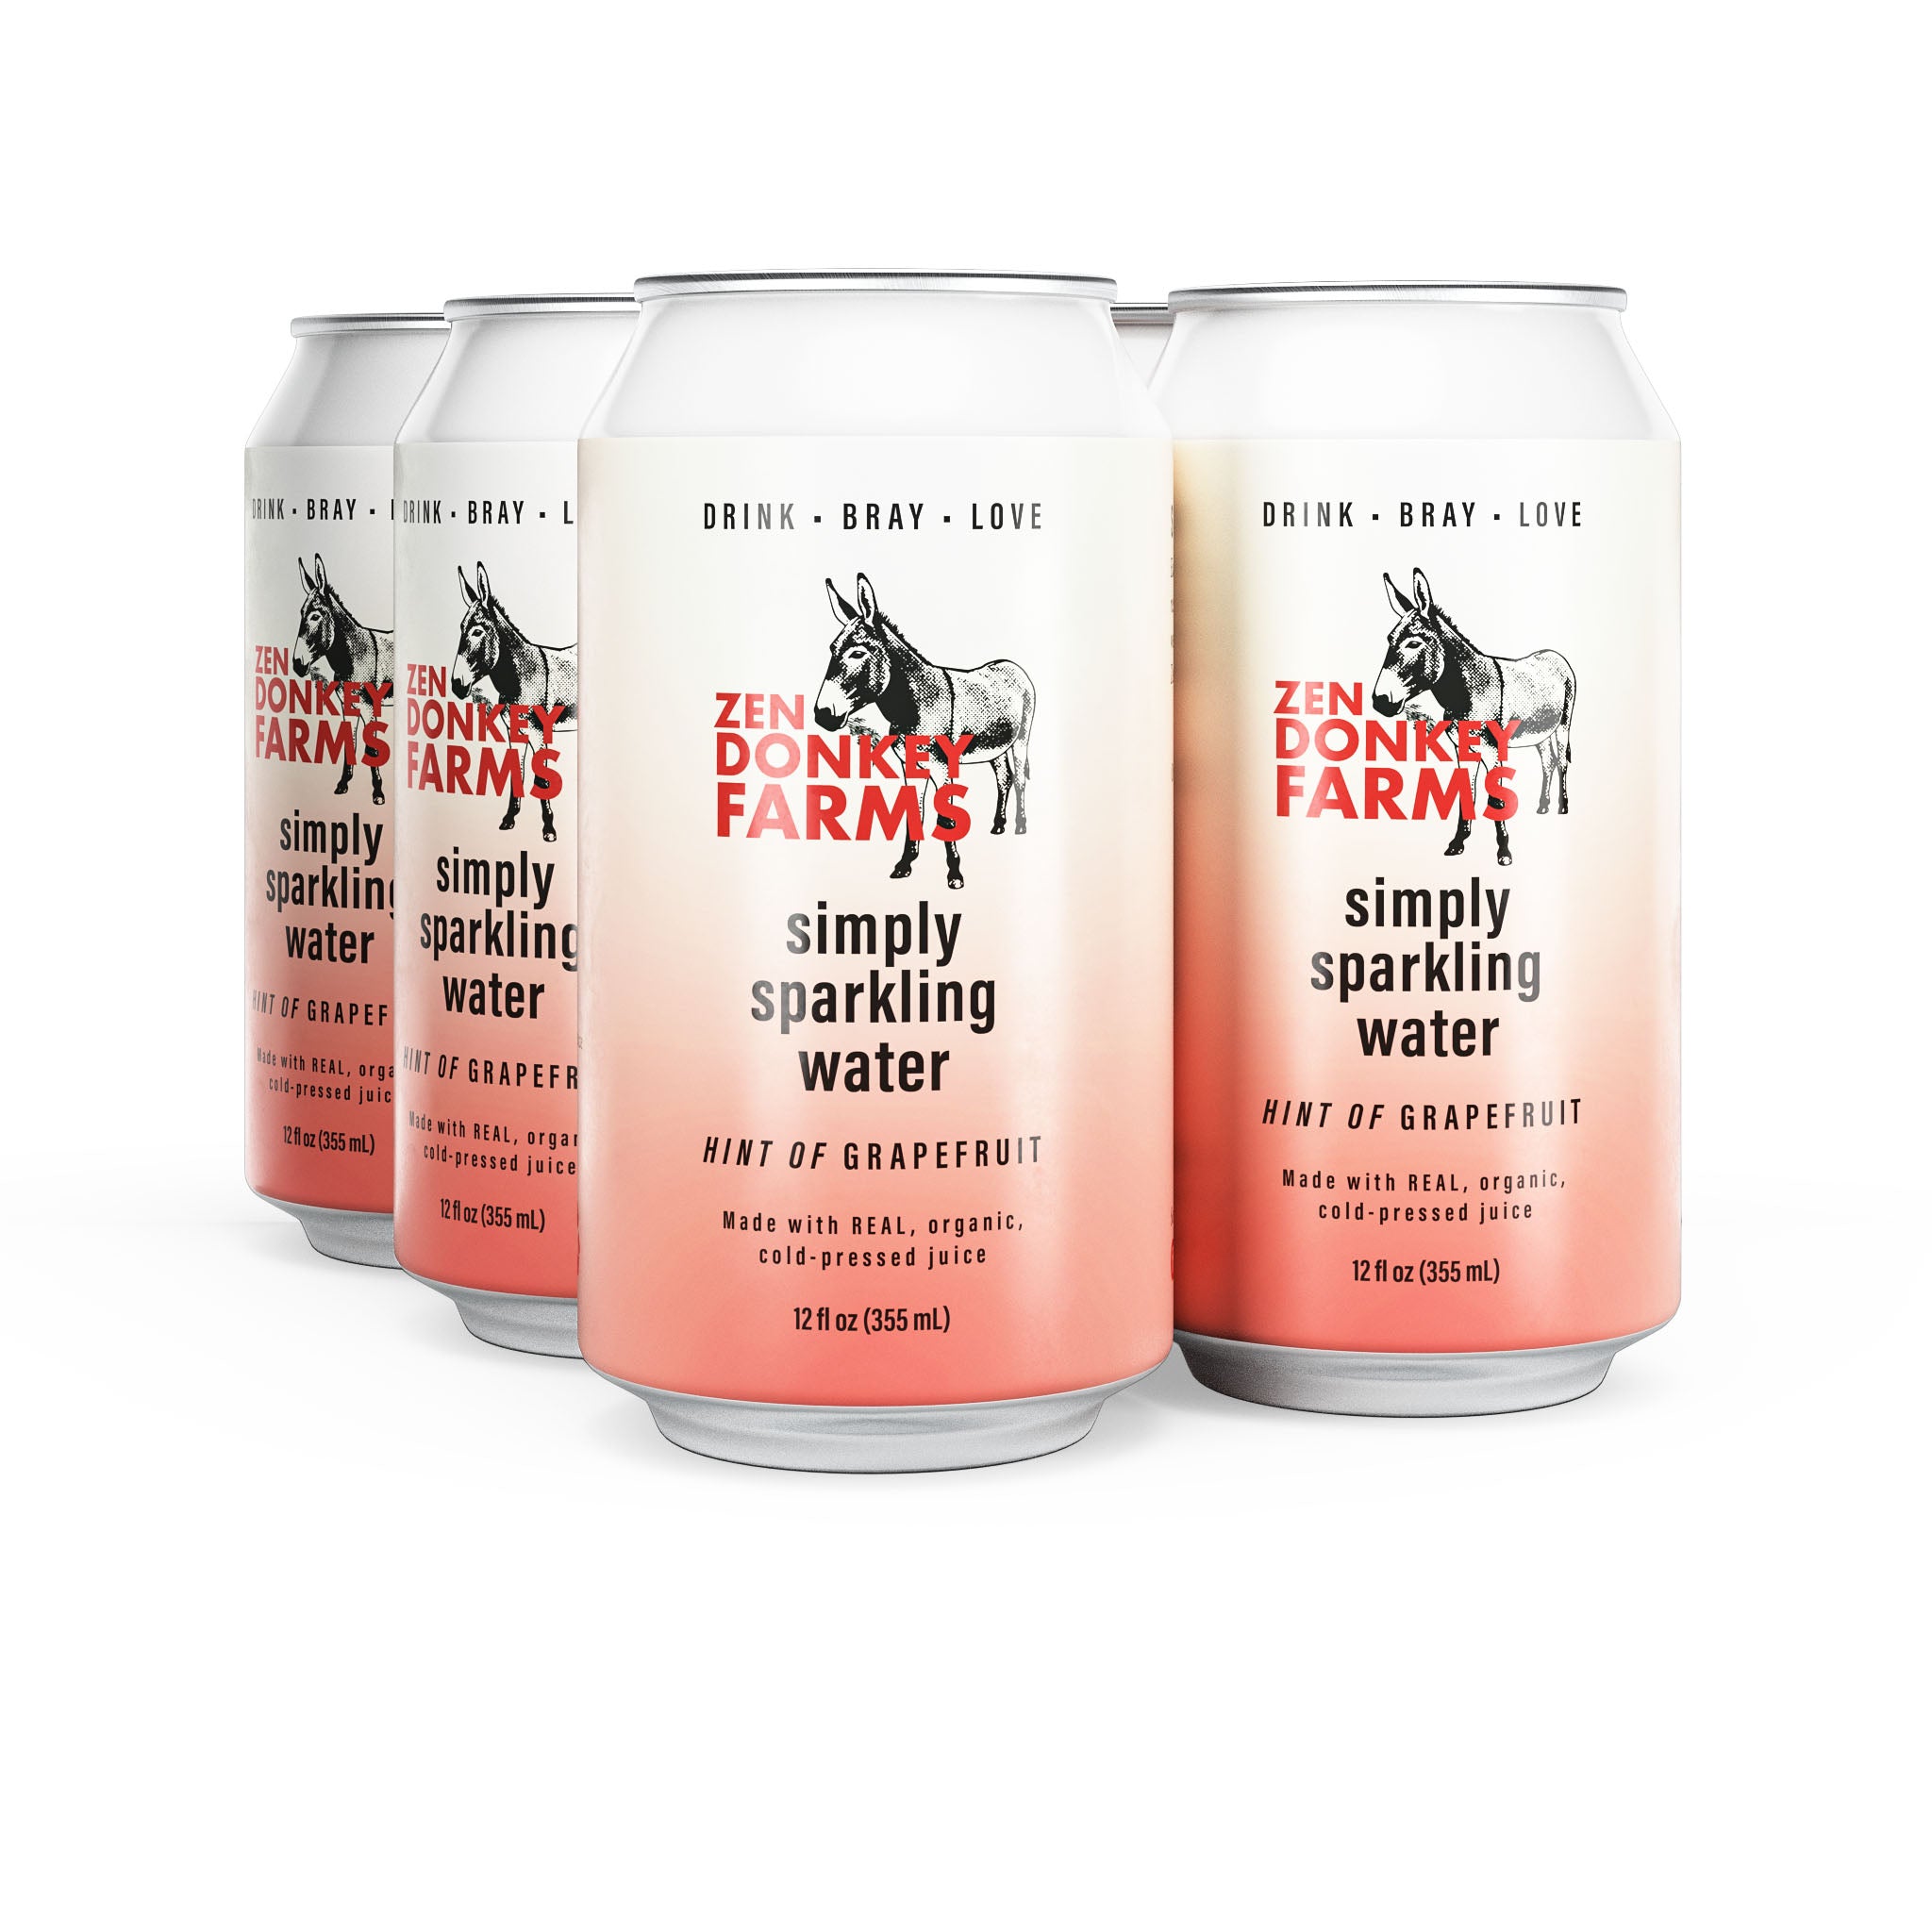 Simply Sparkling Water - Hint of Grapefruit (6-pack) - Zen Donkey Farms